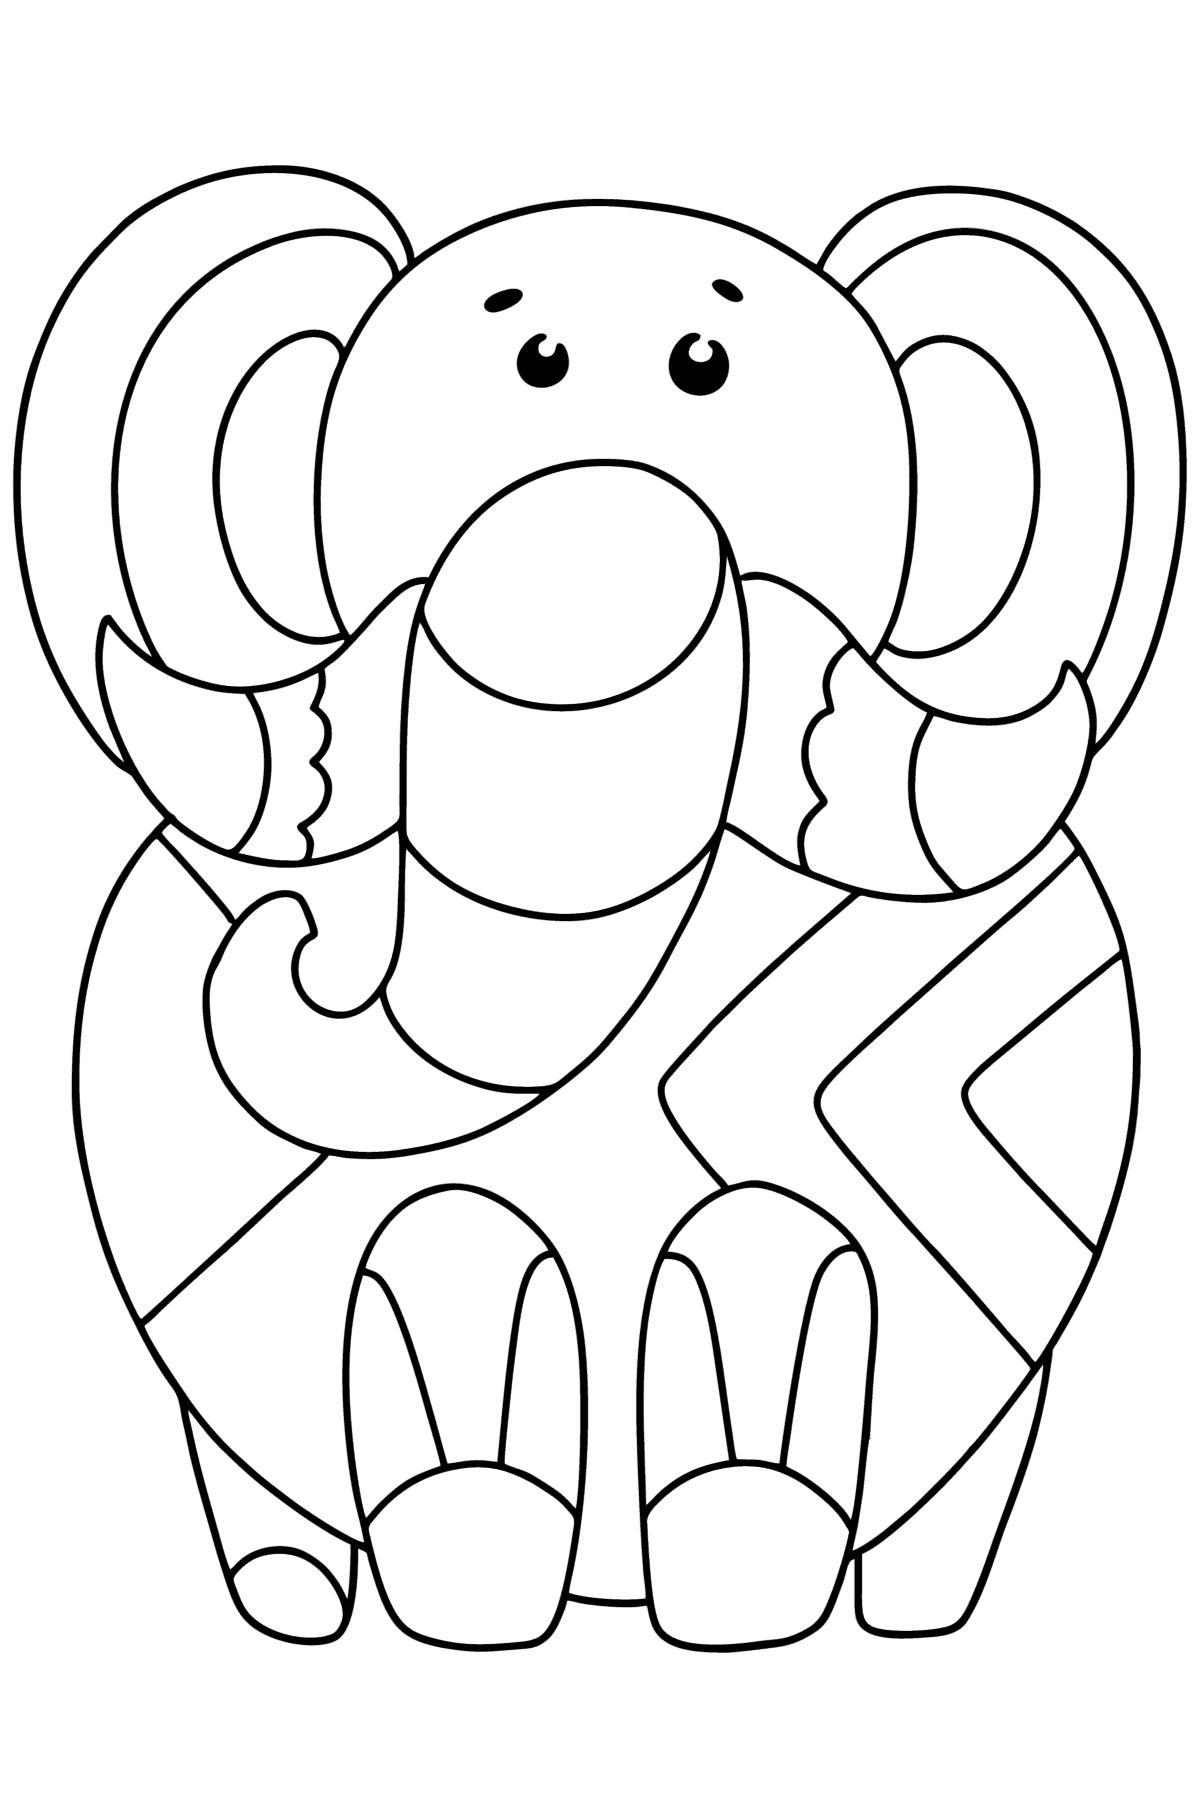 Anti stress Elephant coloring page - Coloring Pages for Kids